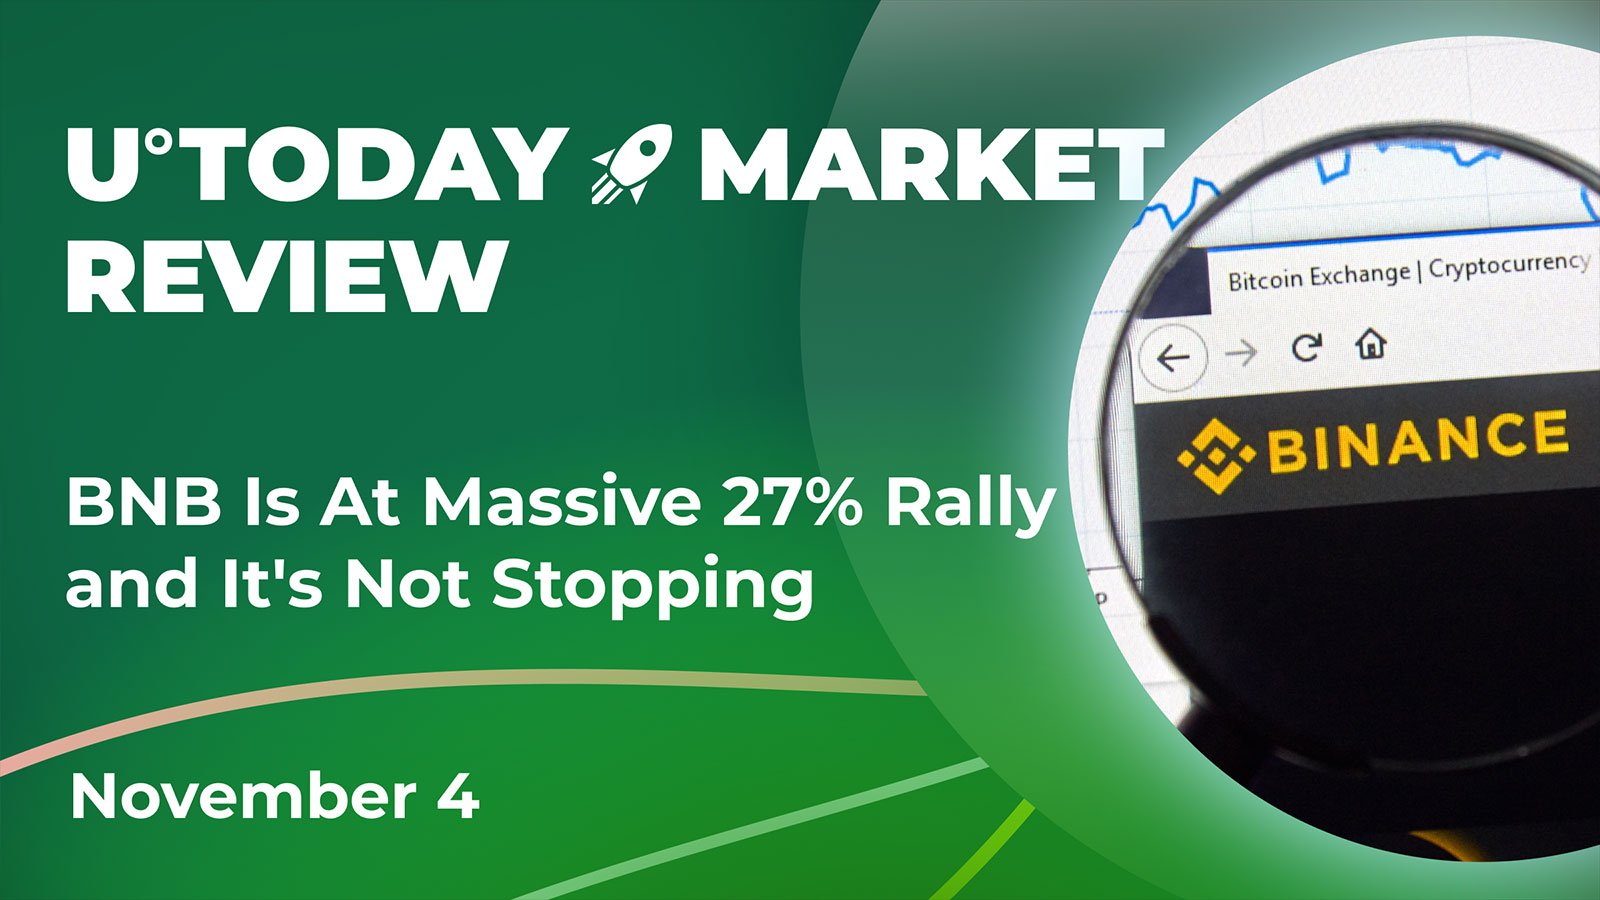 BNB Is in Massive 27% Rally, and It's Not Stopping: Crypto Market Review, November 4